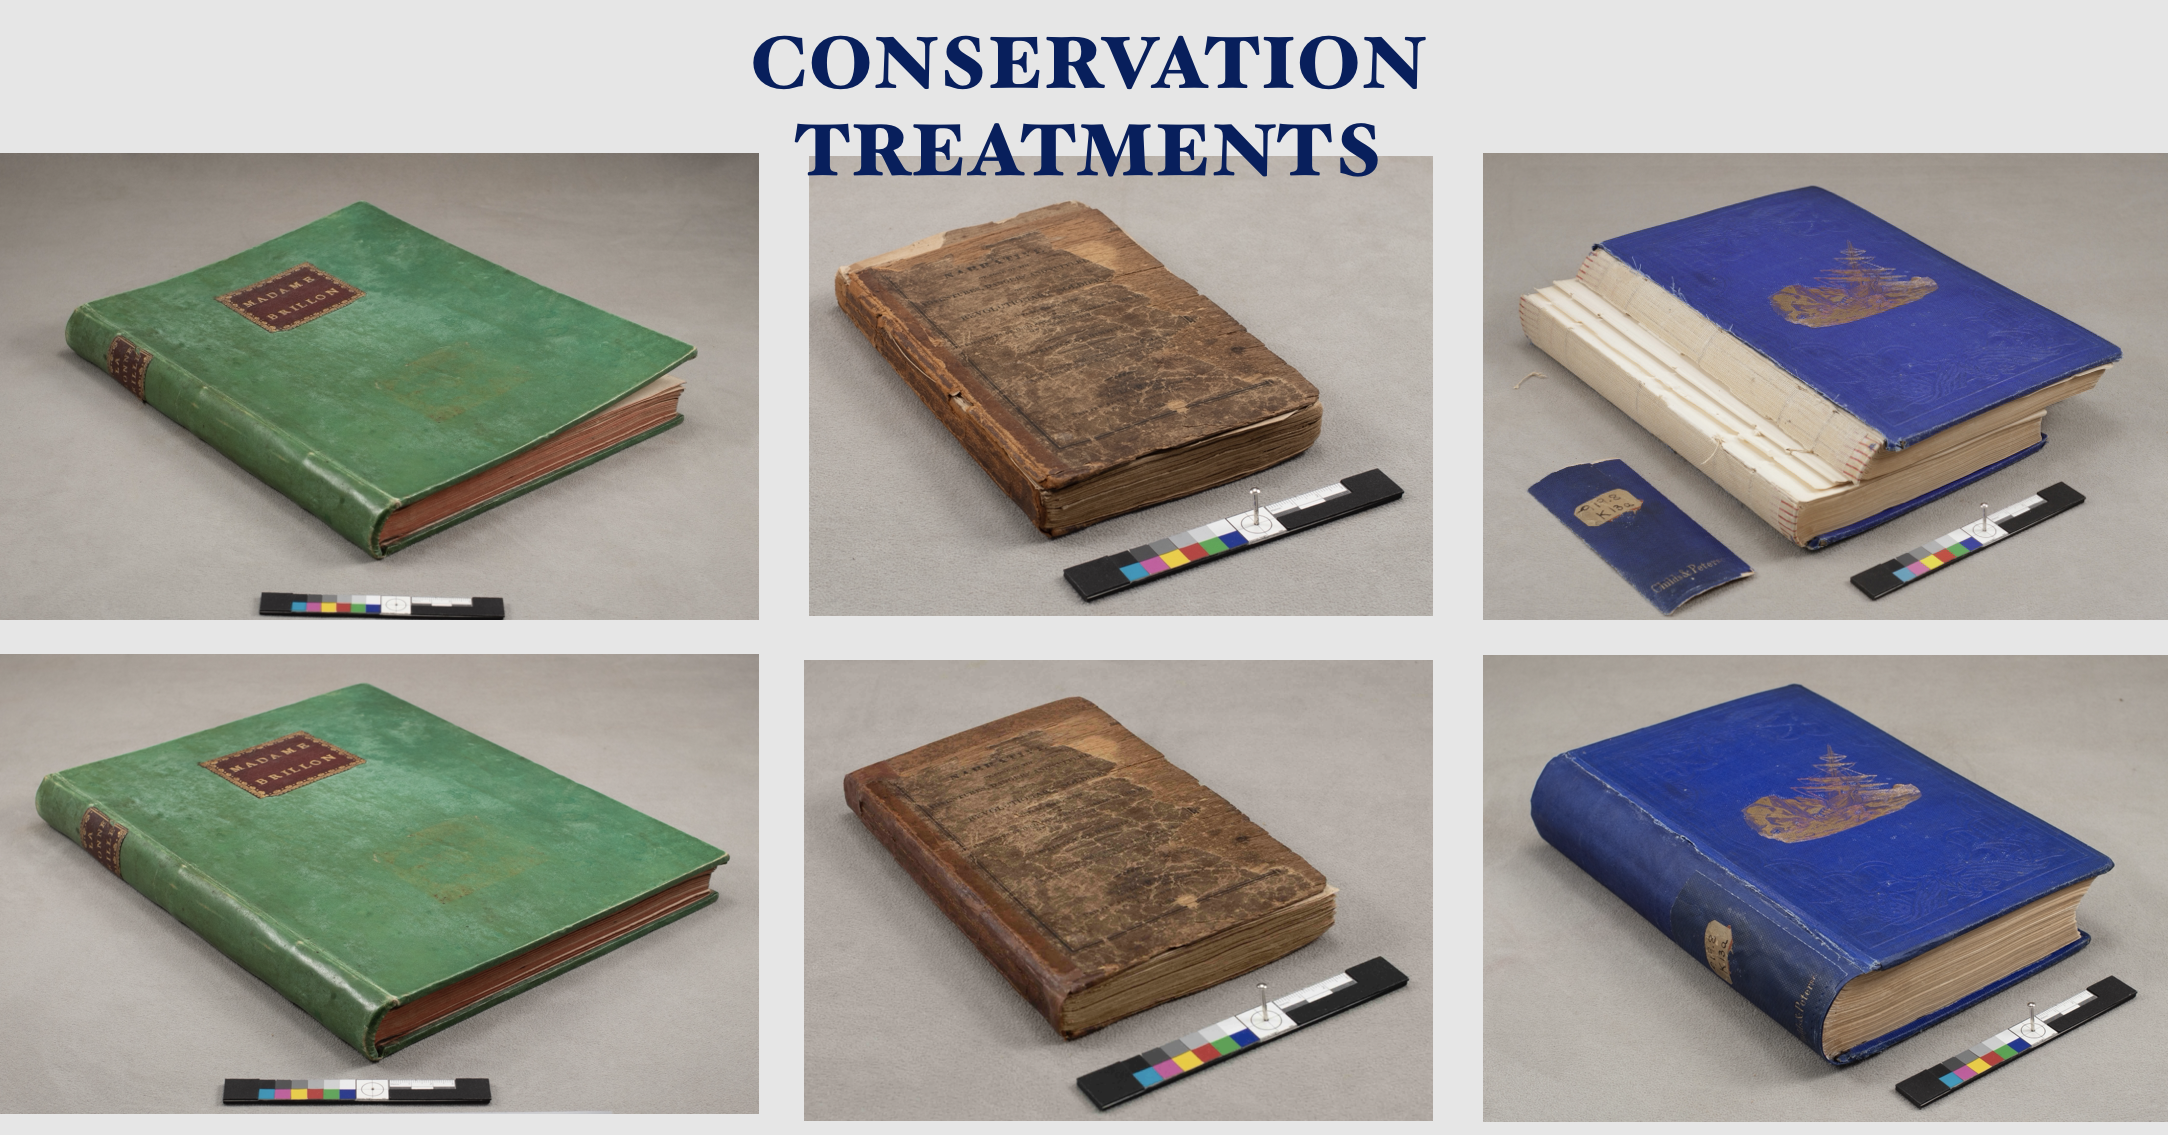 photos of conservation treatments of books